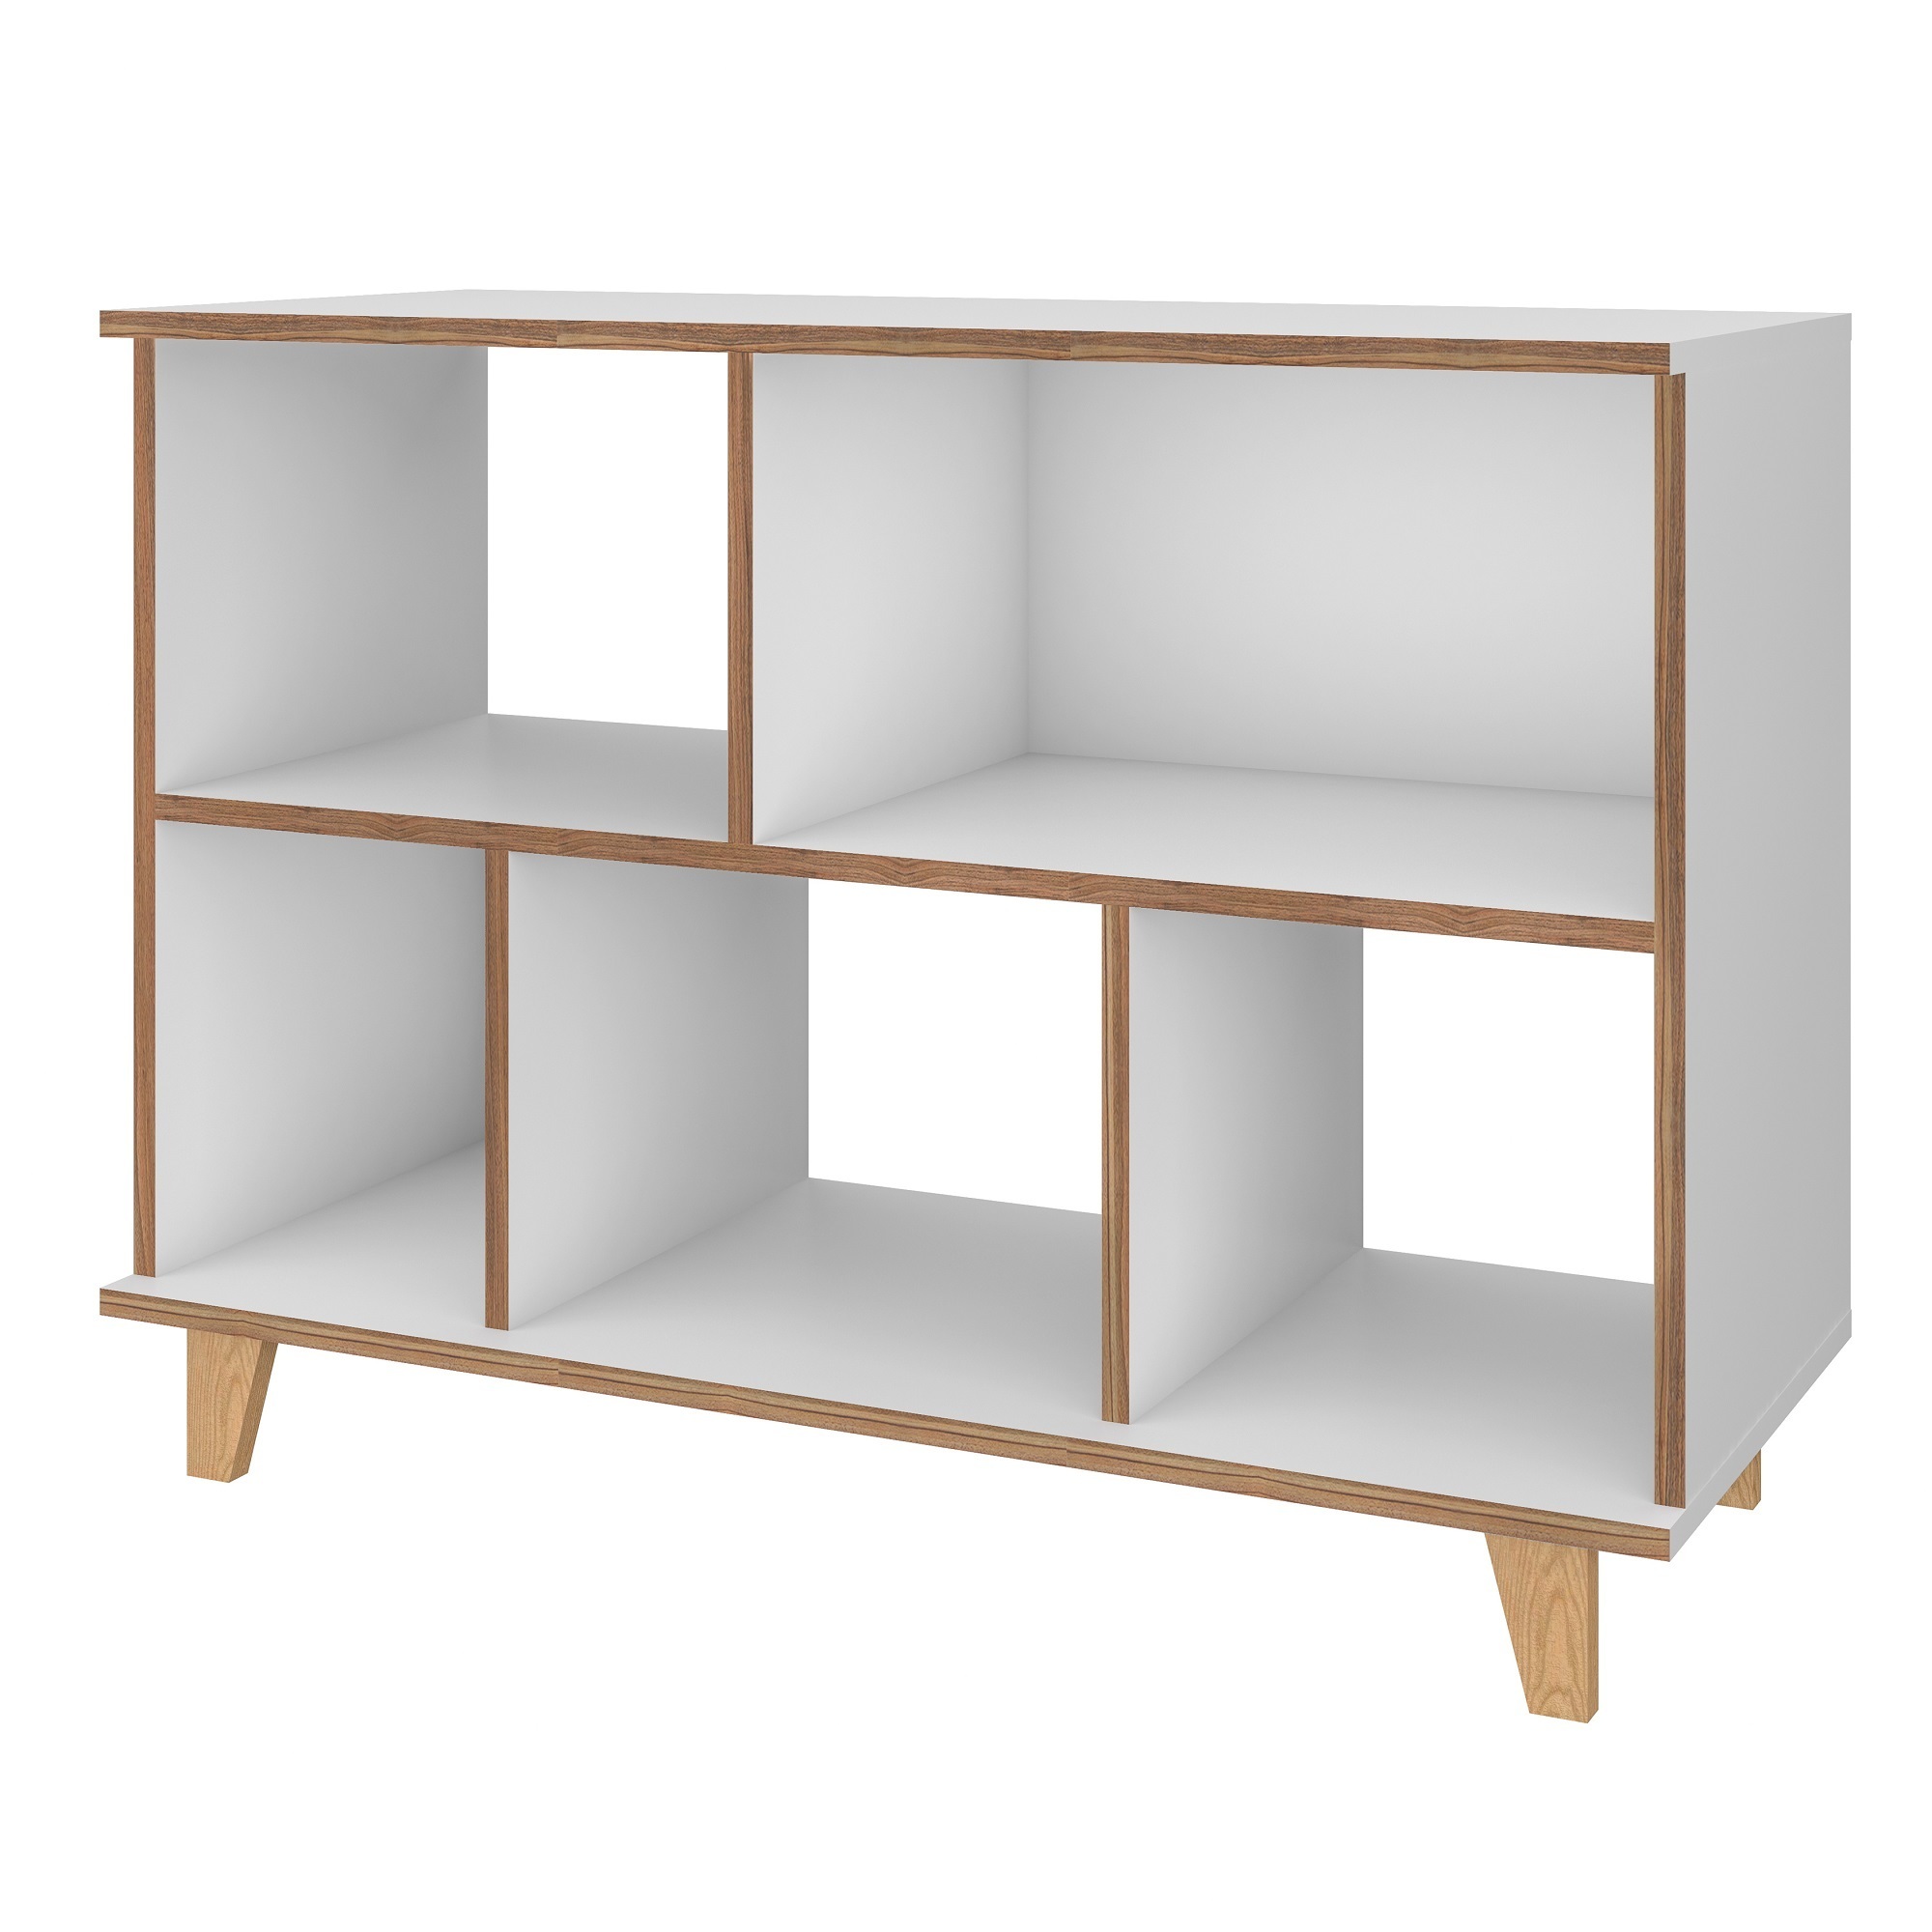 Manhattan Comfort, Minetta 5-Shelf Mid-Century Low Bookcase in White, Height 25.78 in, Shelves (qty.) 5 Material MDPE, Model 129AMC